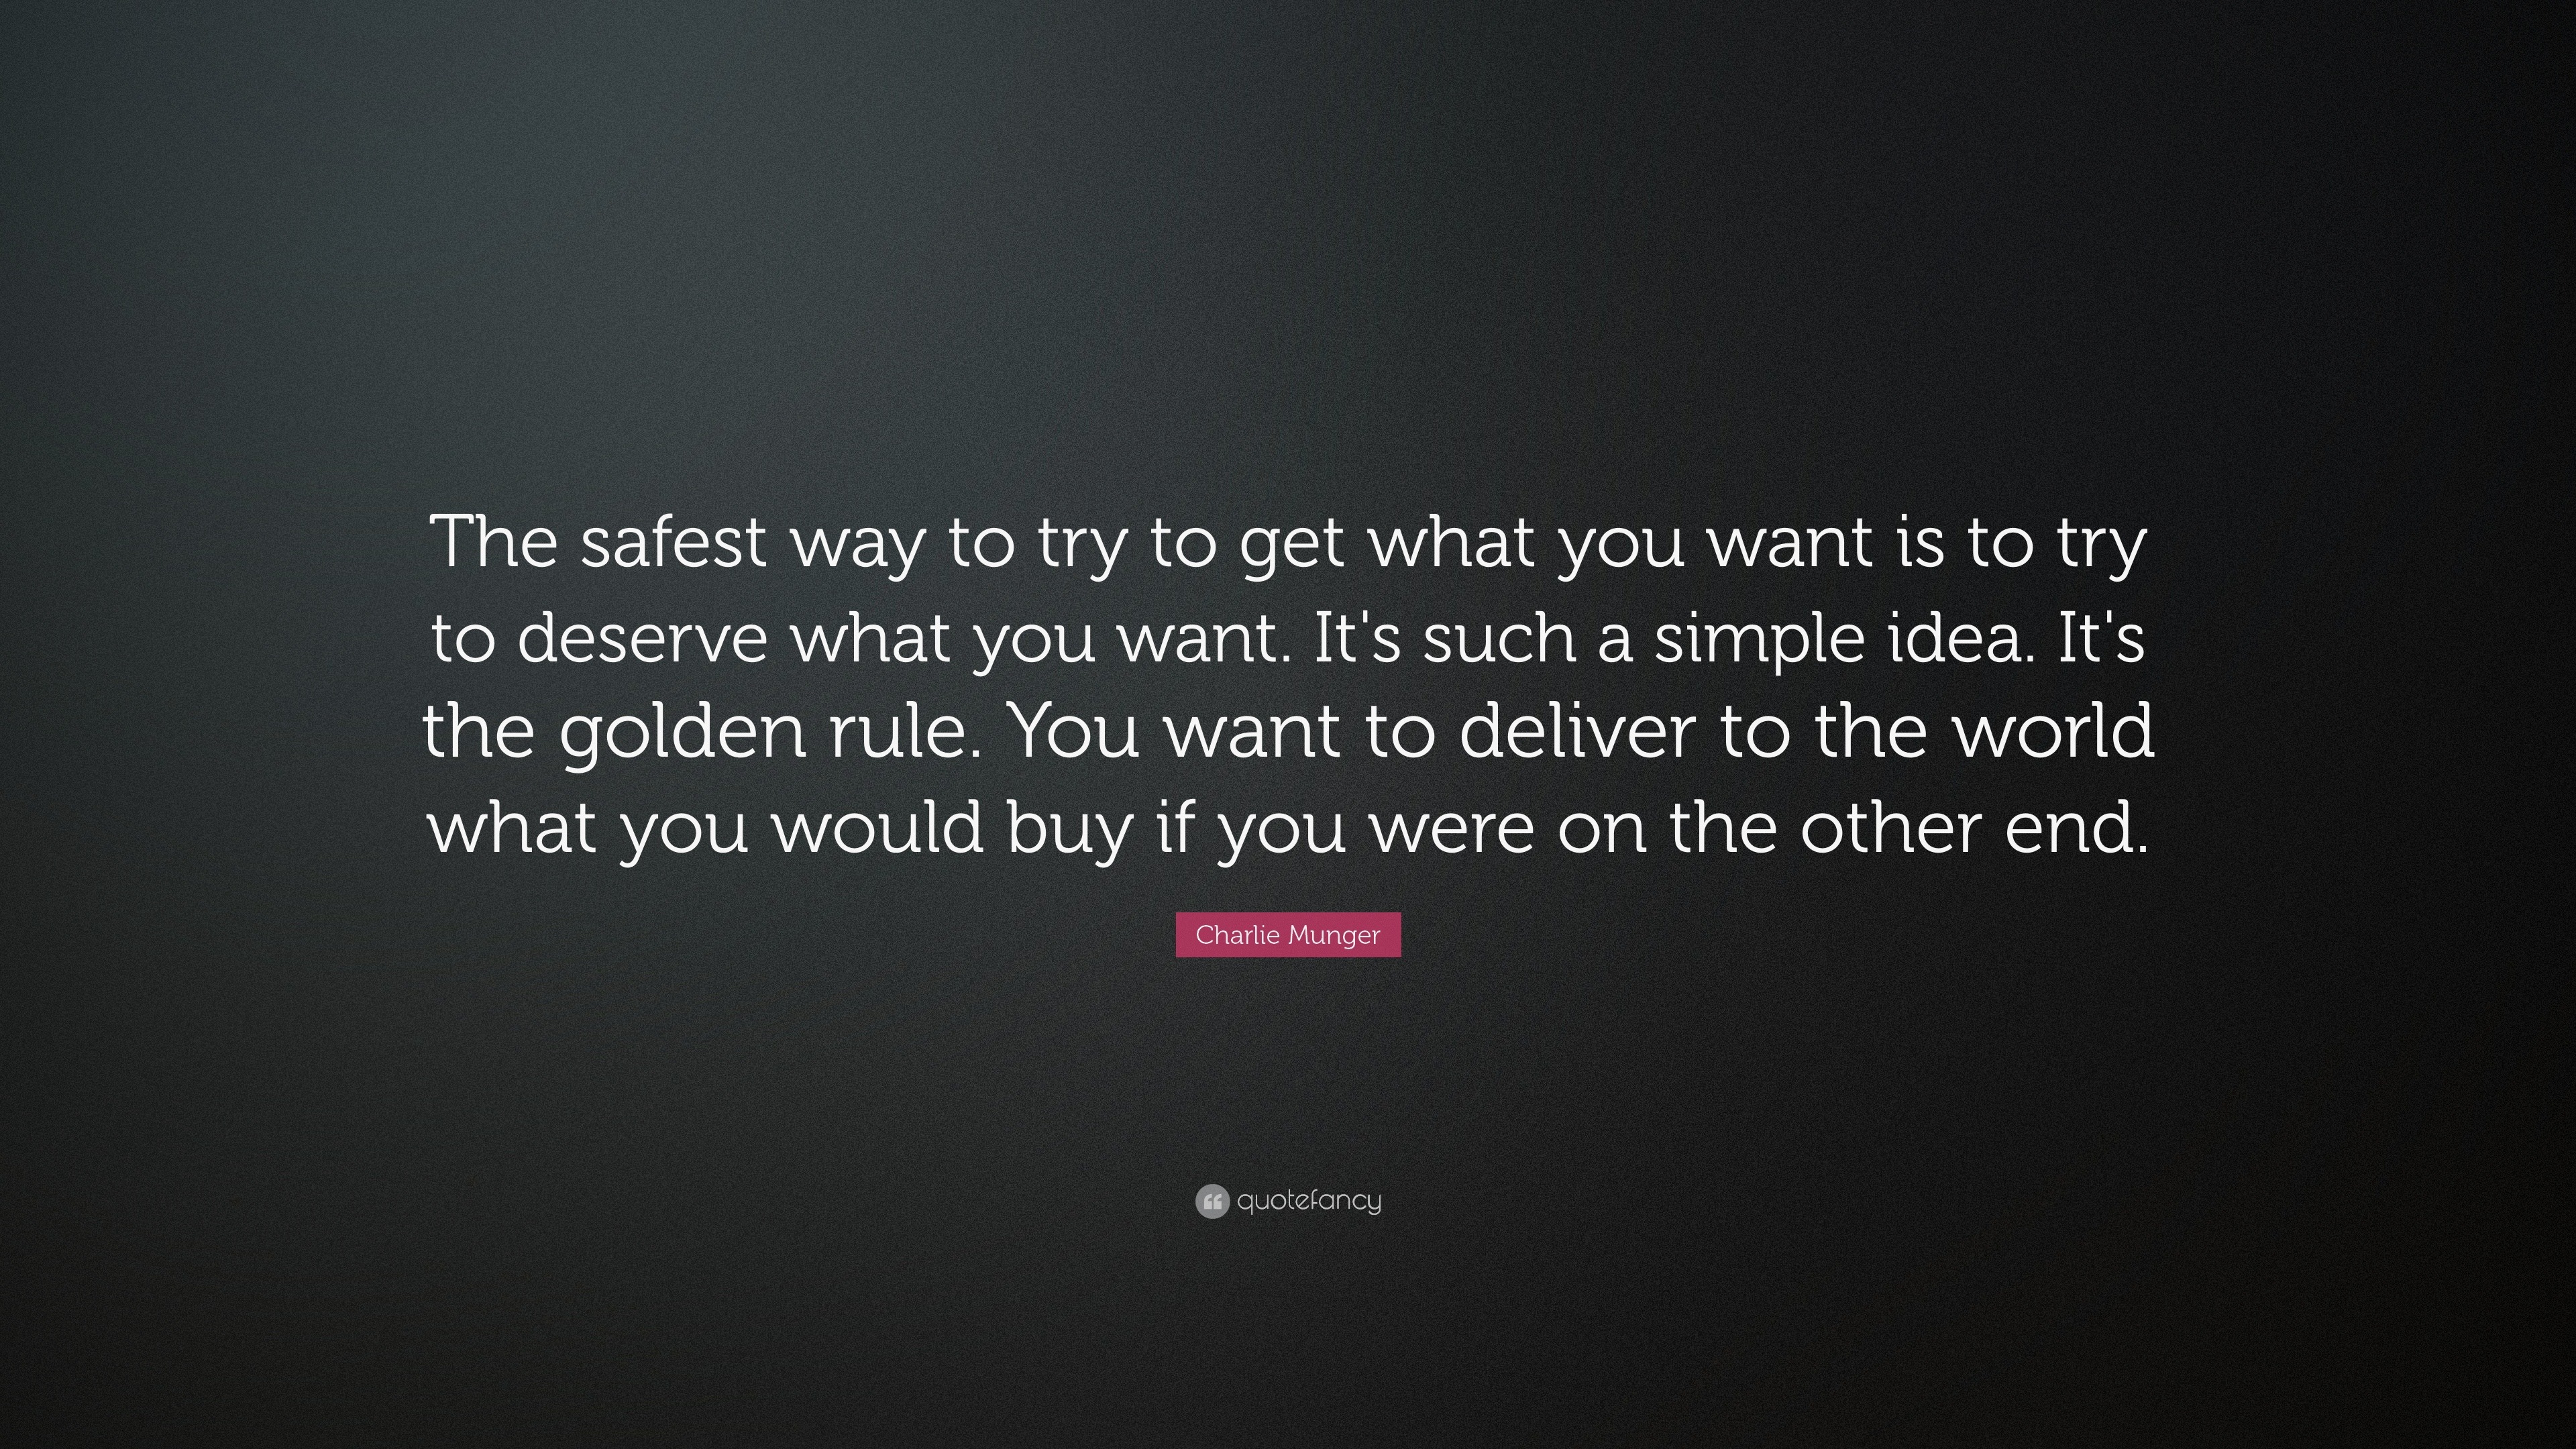 charlie munger quote: "the safest way to try to get what you